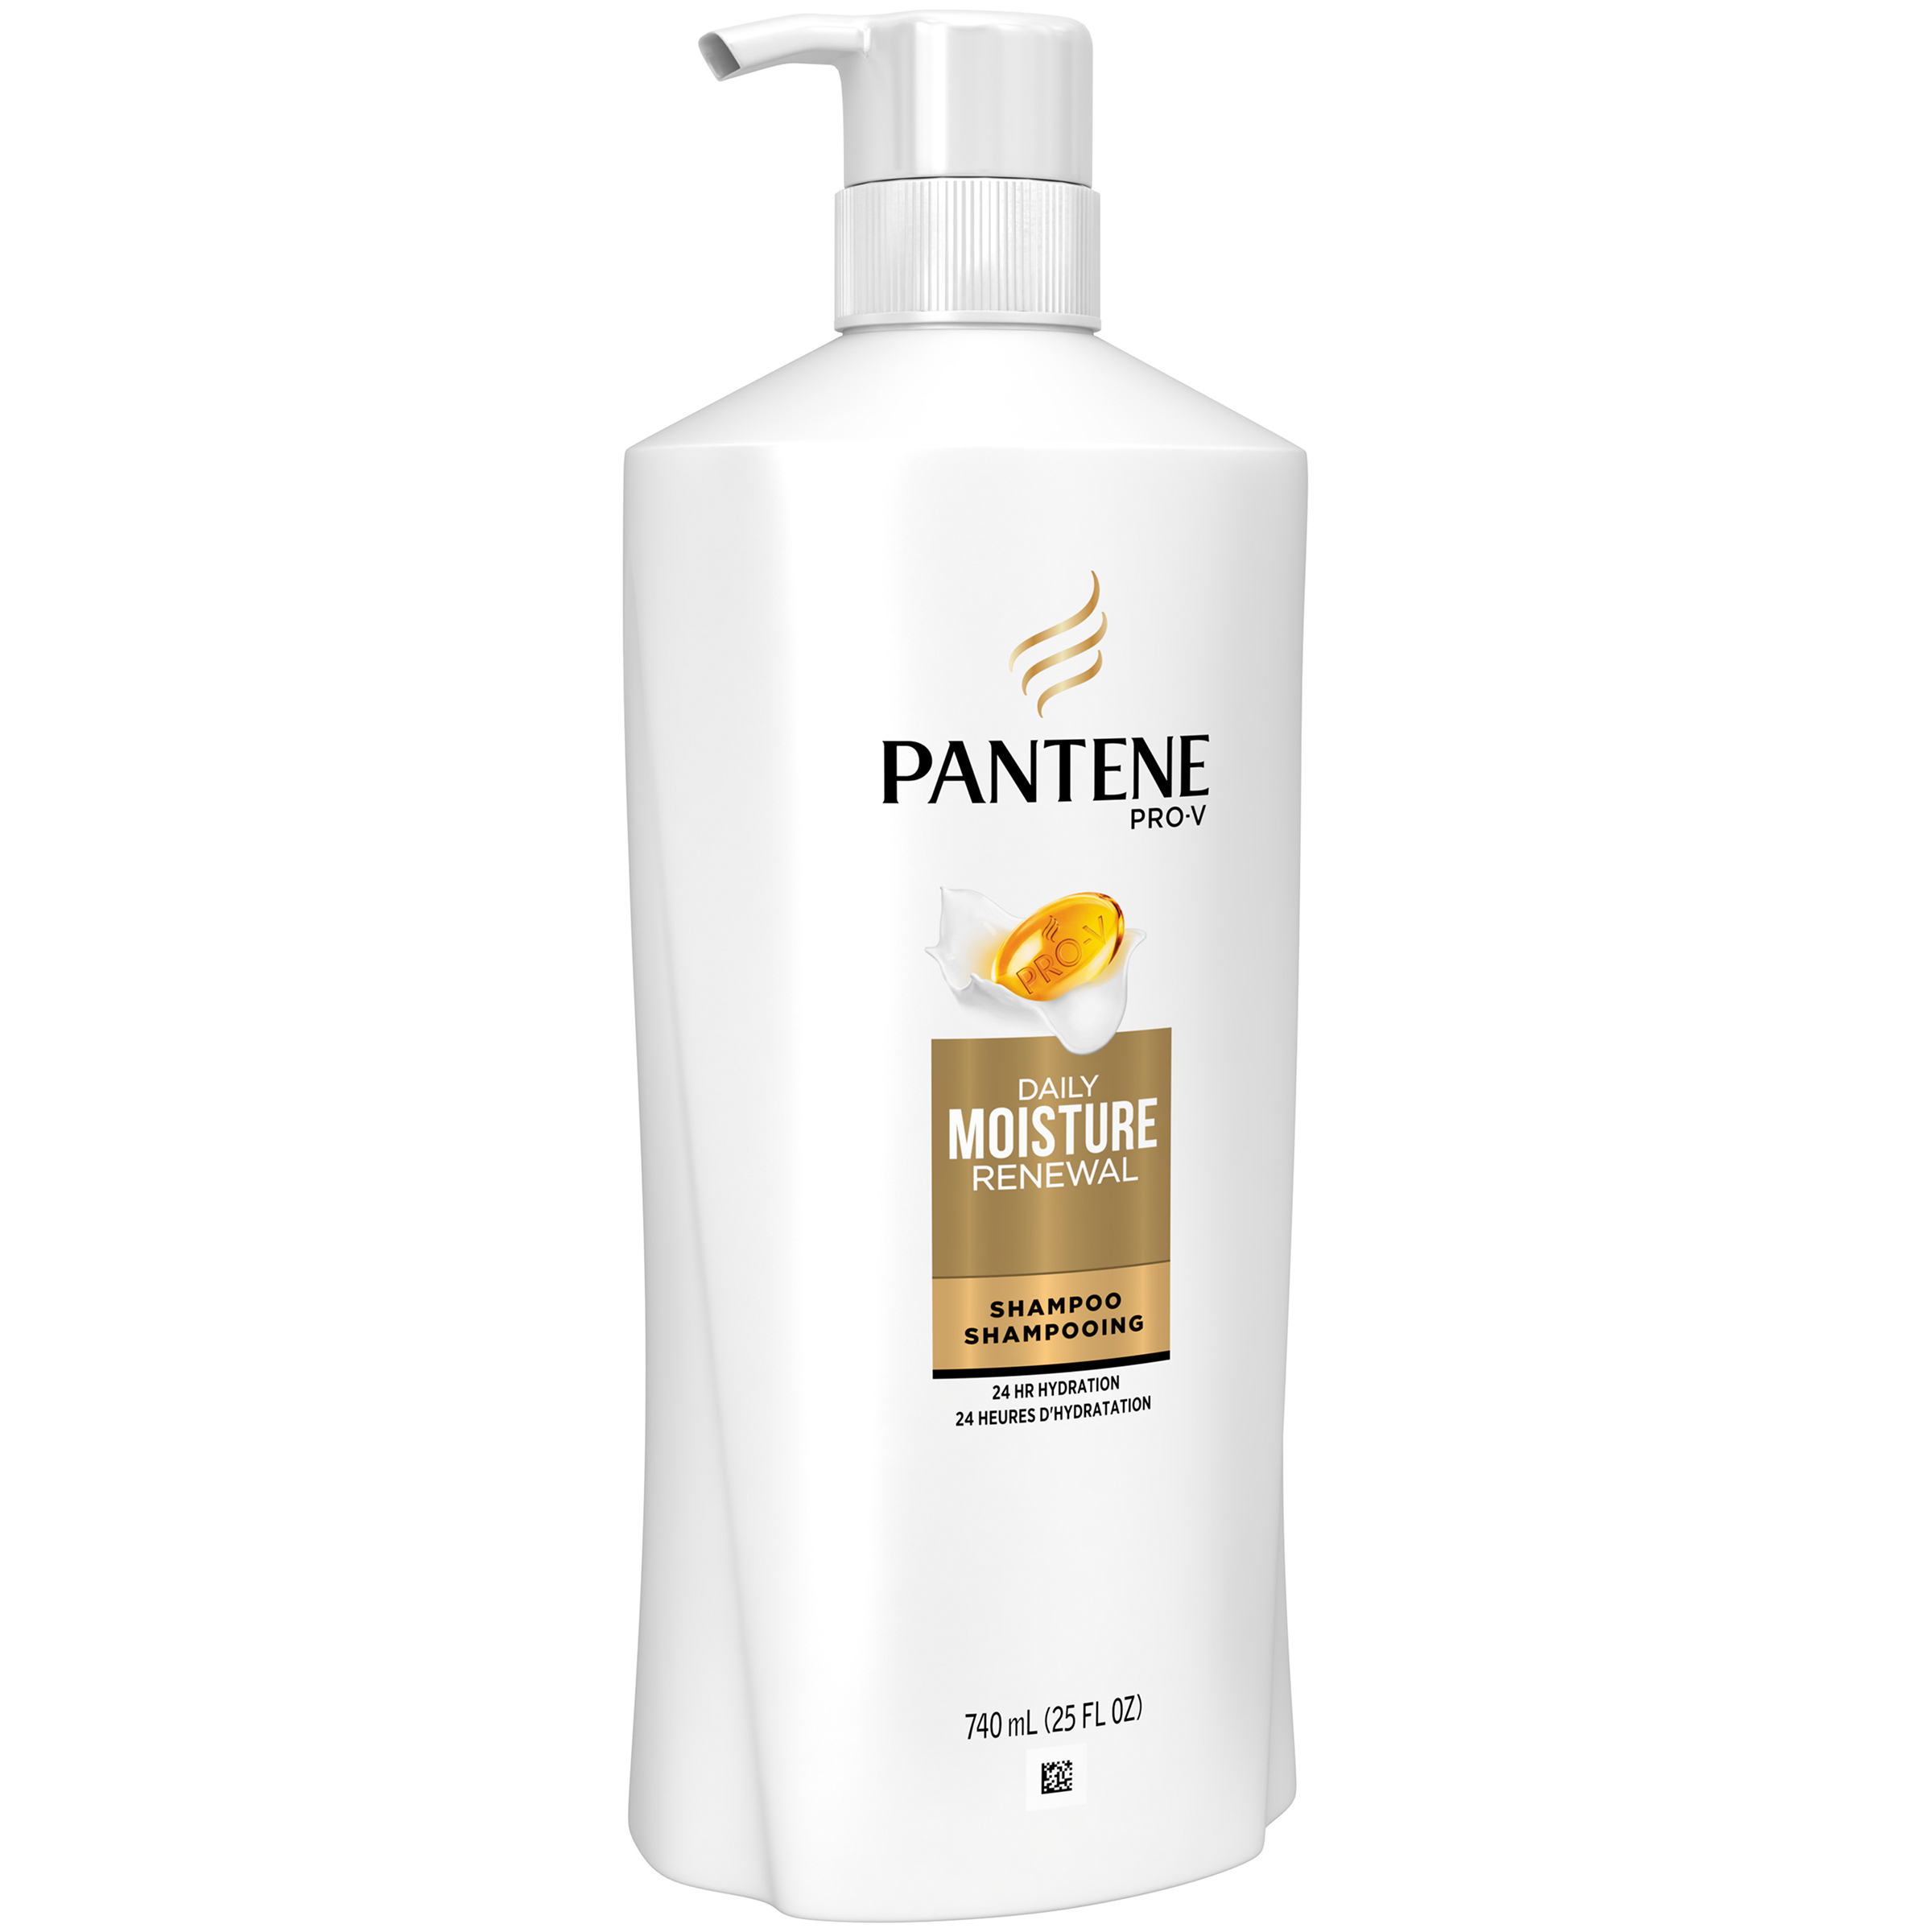 Pantene Pro-V Daily Moisture Renewal Shampoo and Conditioner Dual Pack, 48.7 fl oz - image 5 of 6